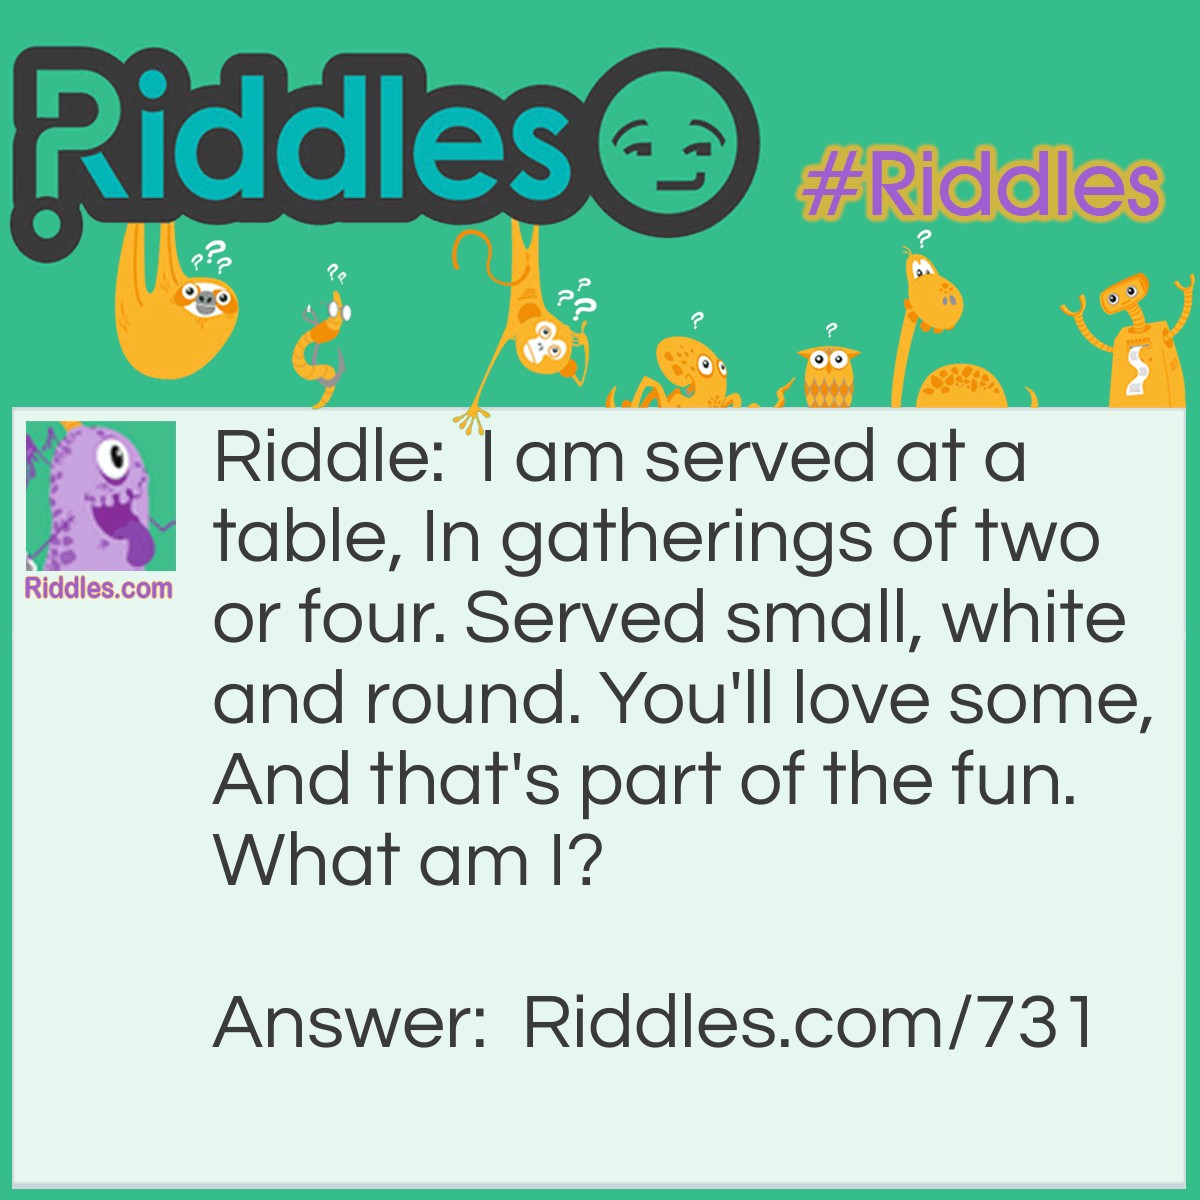 Riddle: I am served at a table, In gatherings of two or four. Served small, white and round. You'll love some, And that's part of the fun.
What am I? Answer: Ping-pong balls.